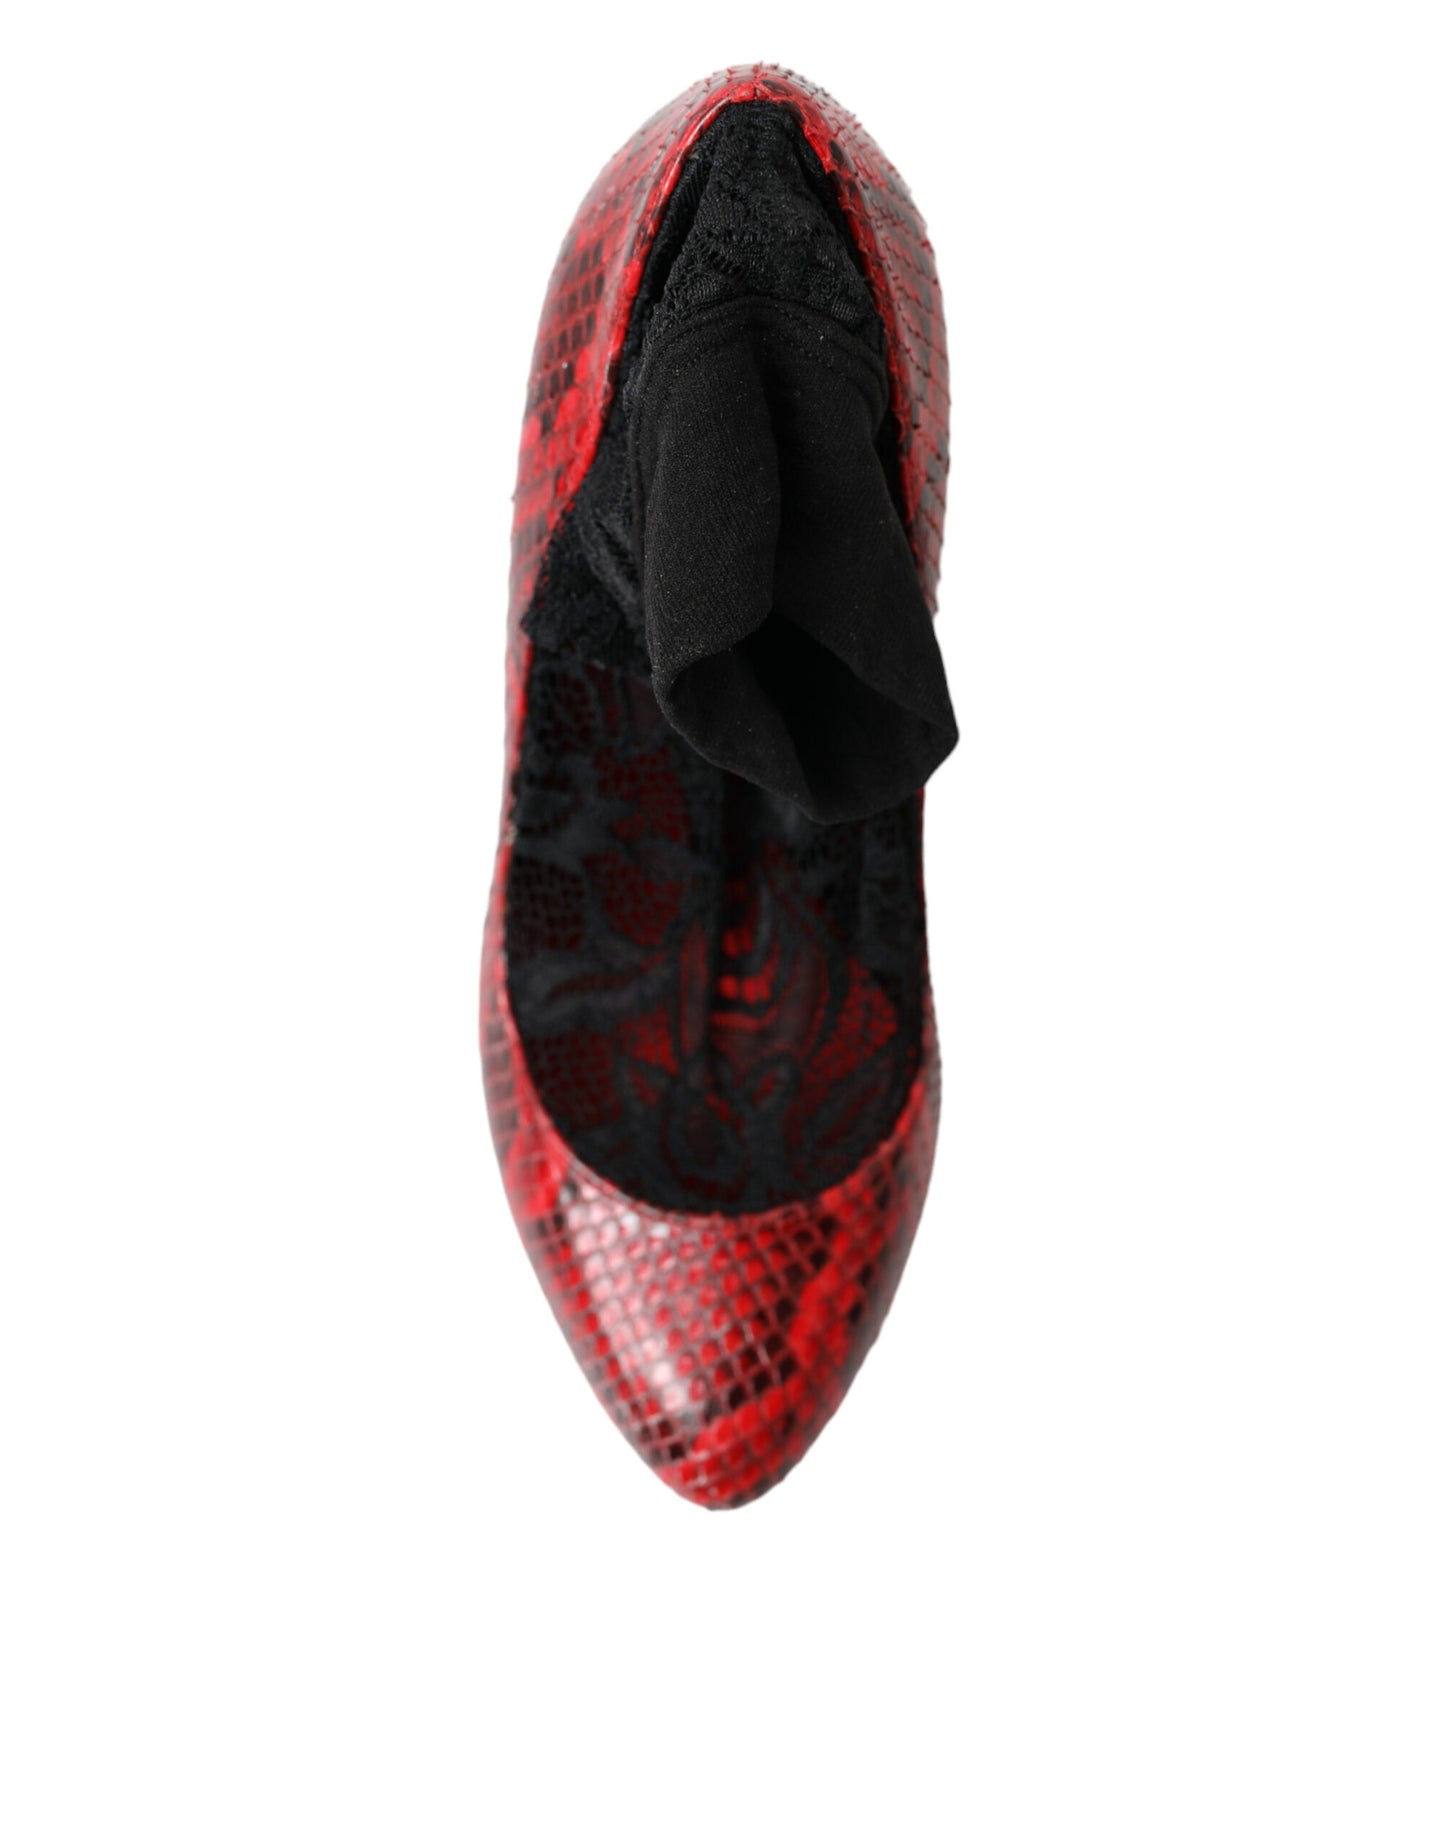 Red Ayers Leather Lace Socks Pumps Shoes